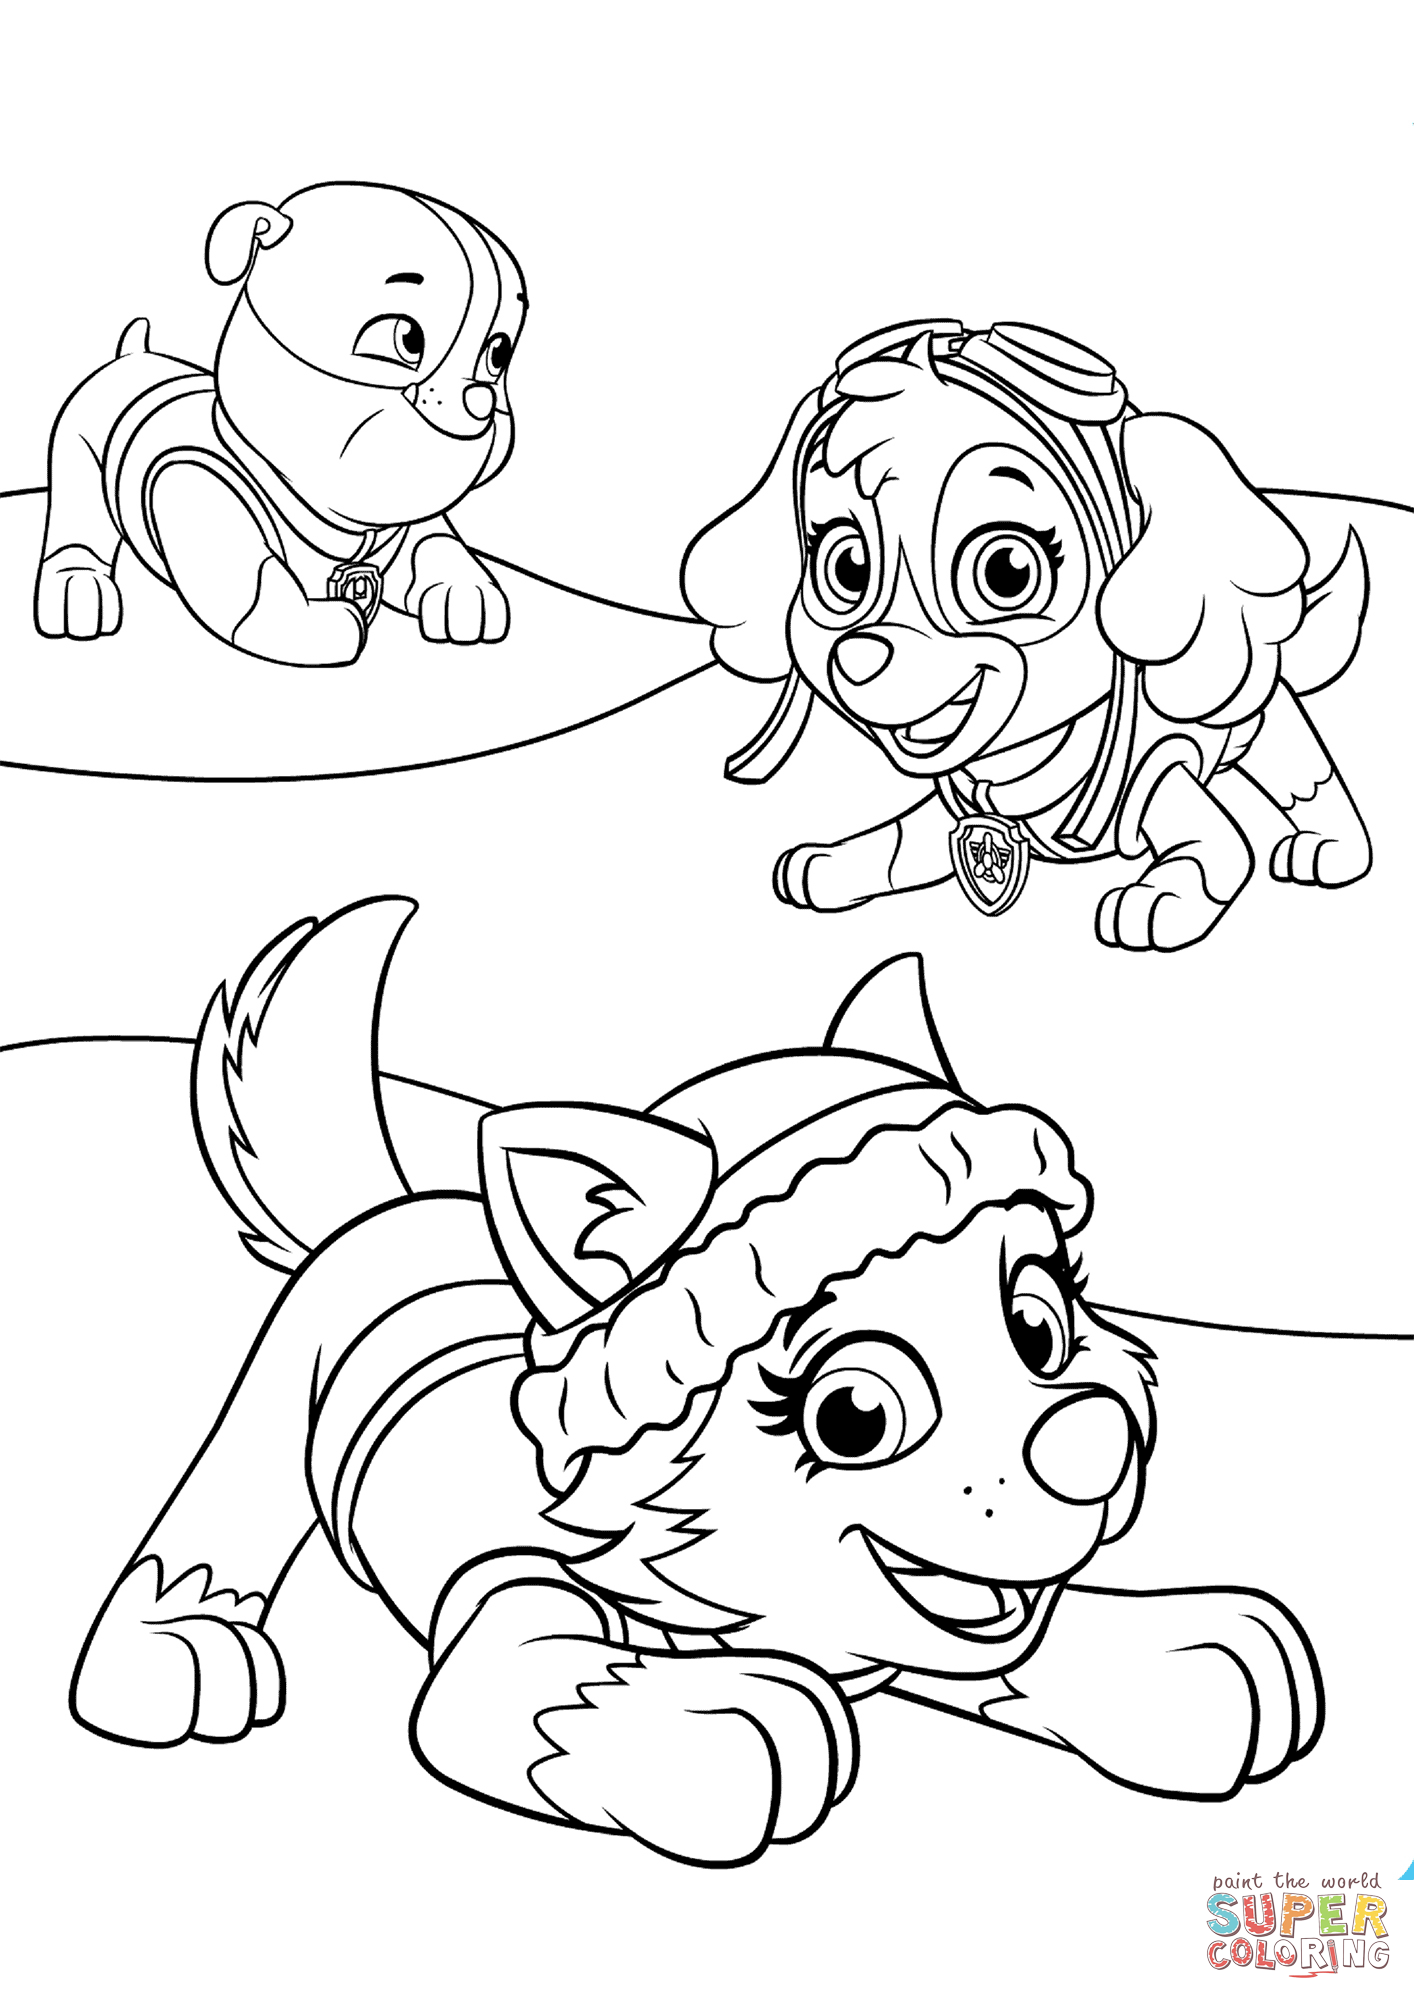 Paw Patrol Coloring Pages Sky at Free printable colorings pages to print and